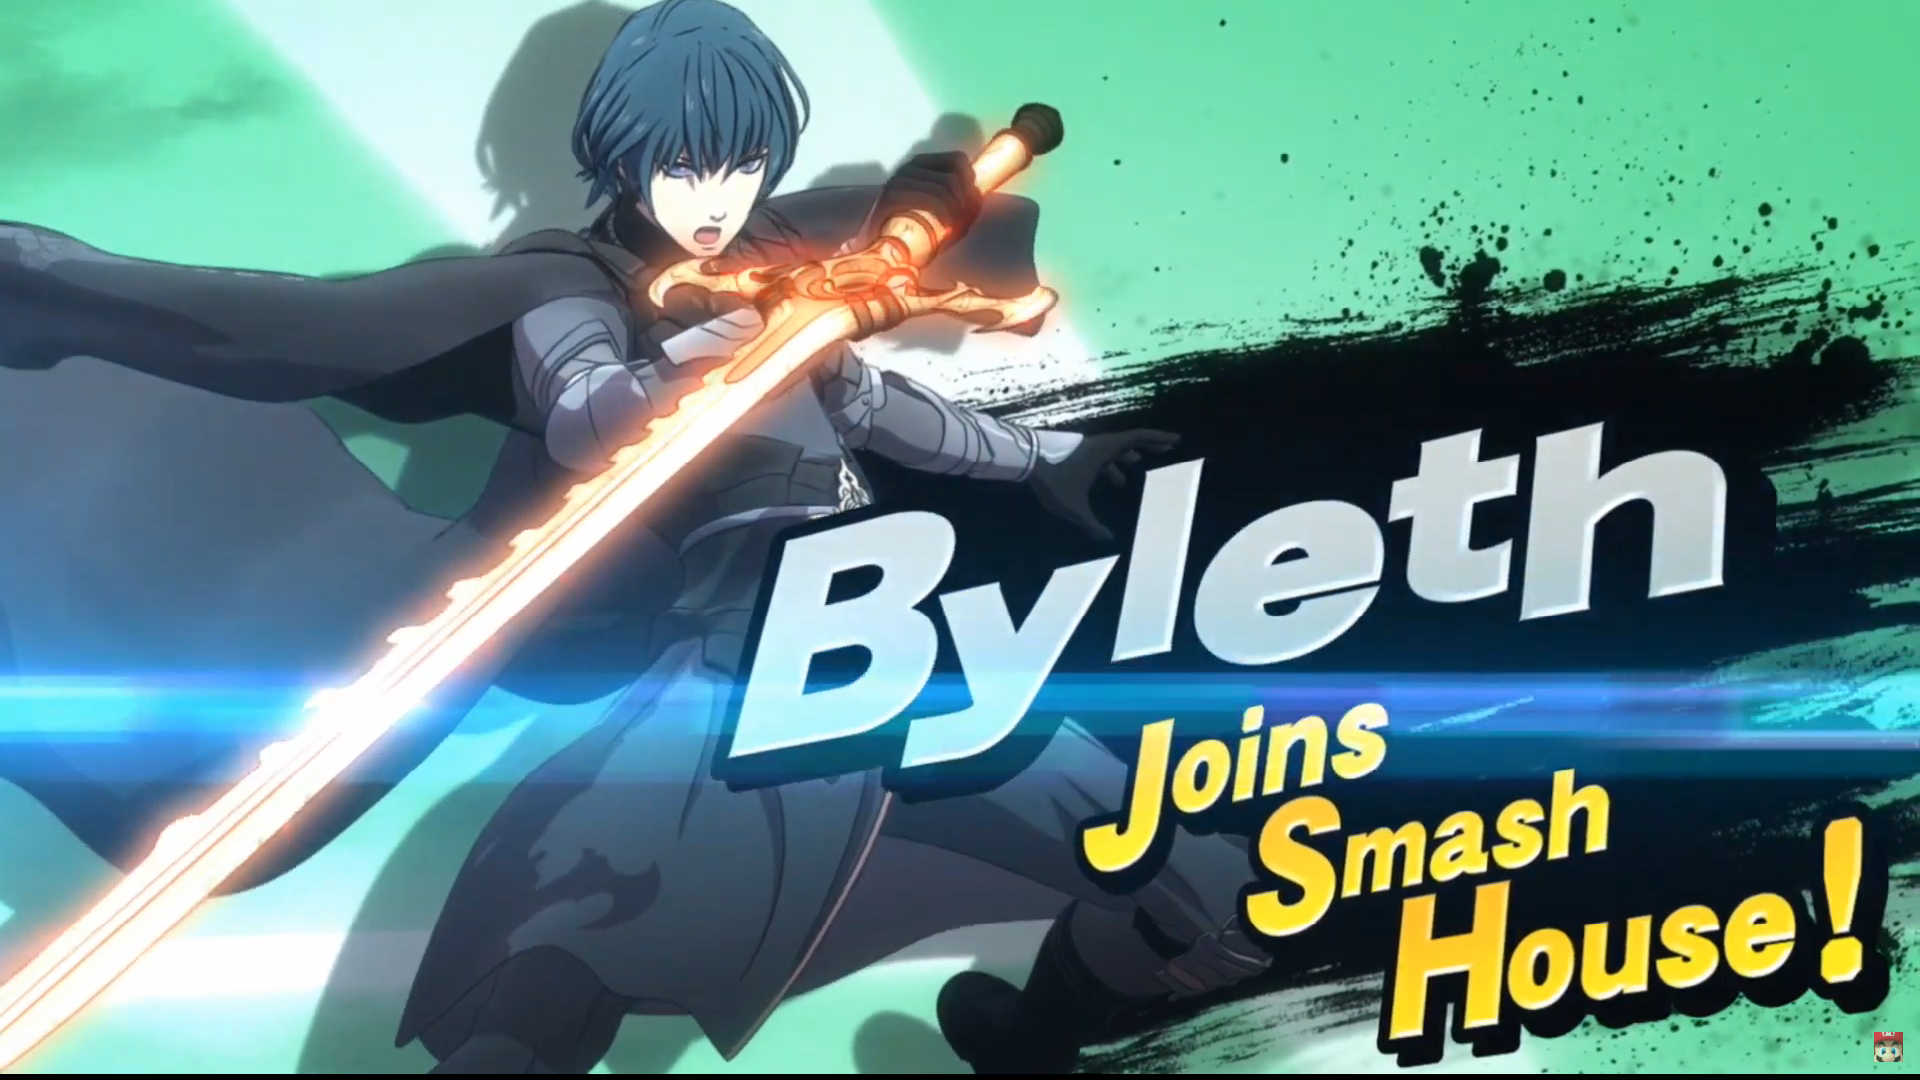 Fire Emblem: Three Houses' Byleth is set to join Super Smash Bros. 